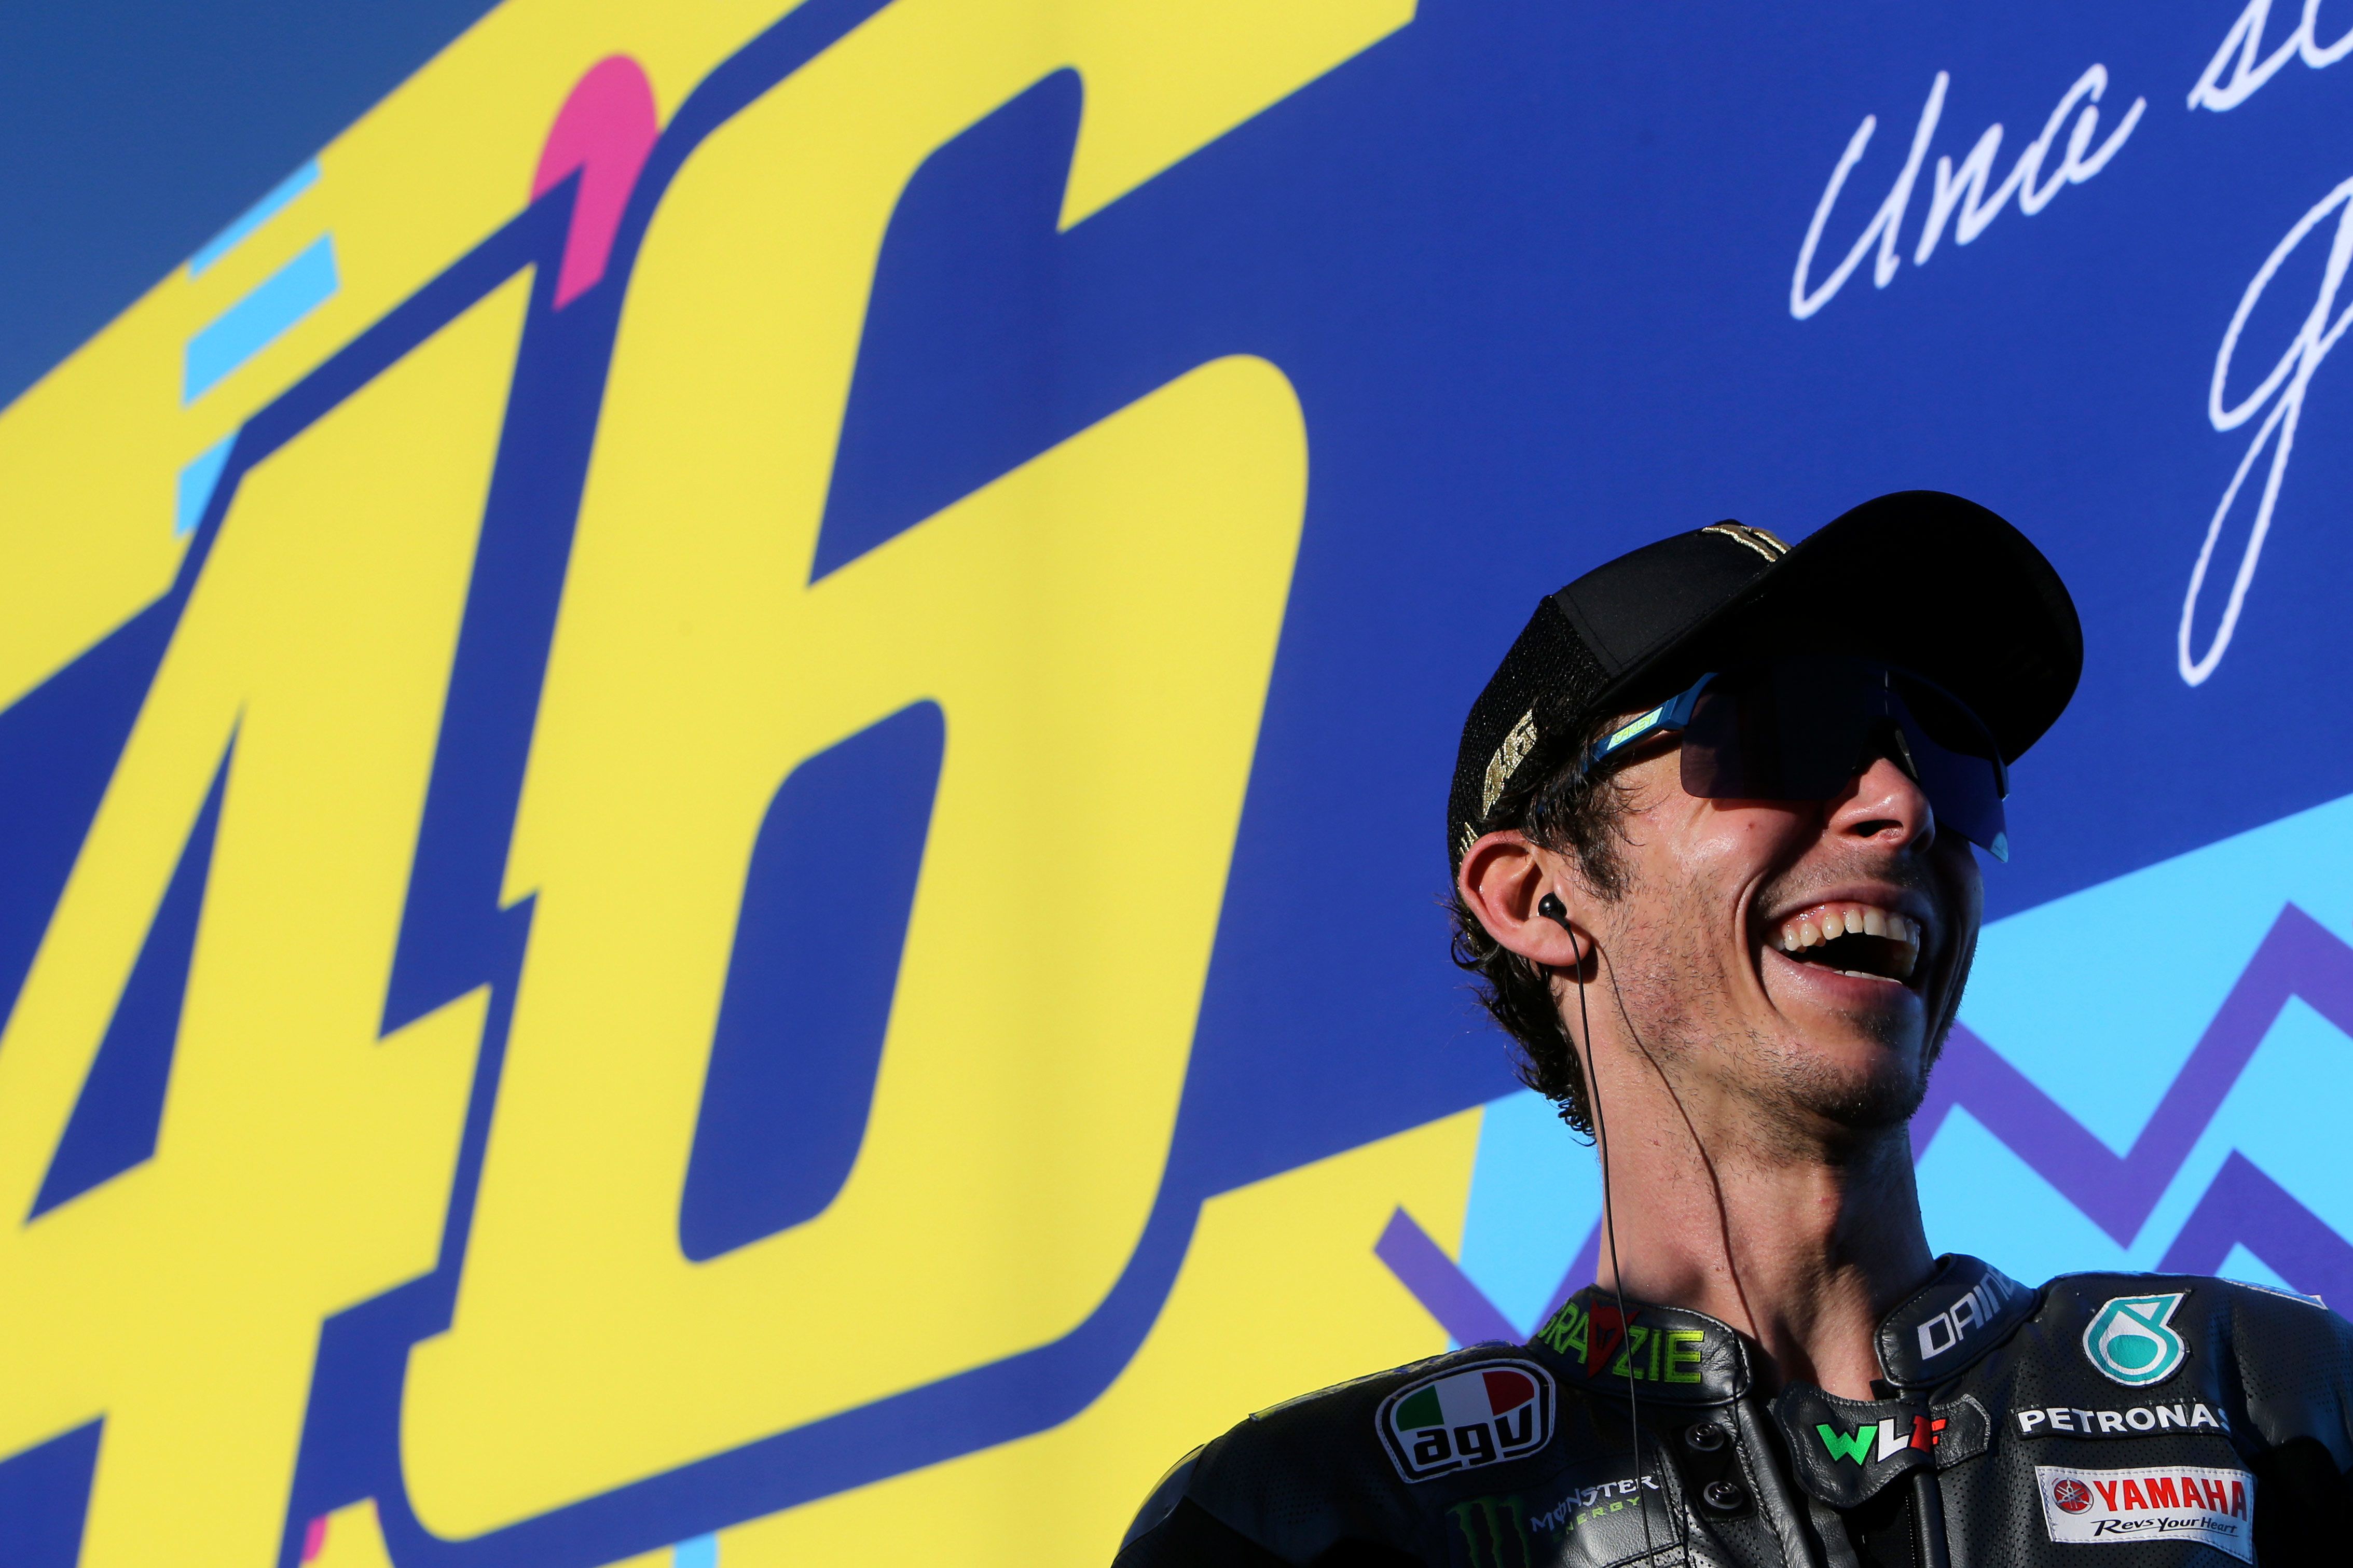 Motorcycling great Valentino Rossi retiring at end of year